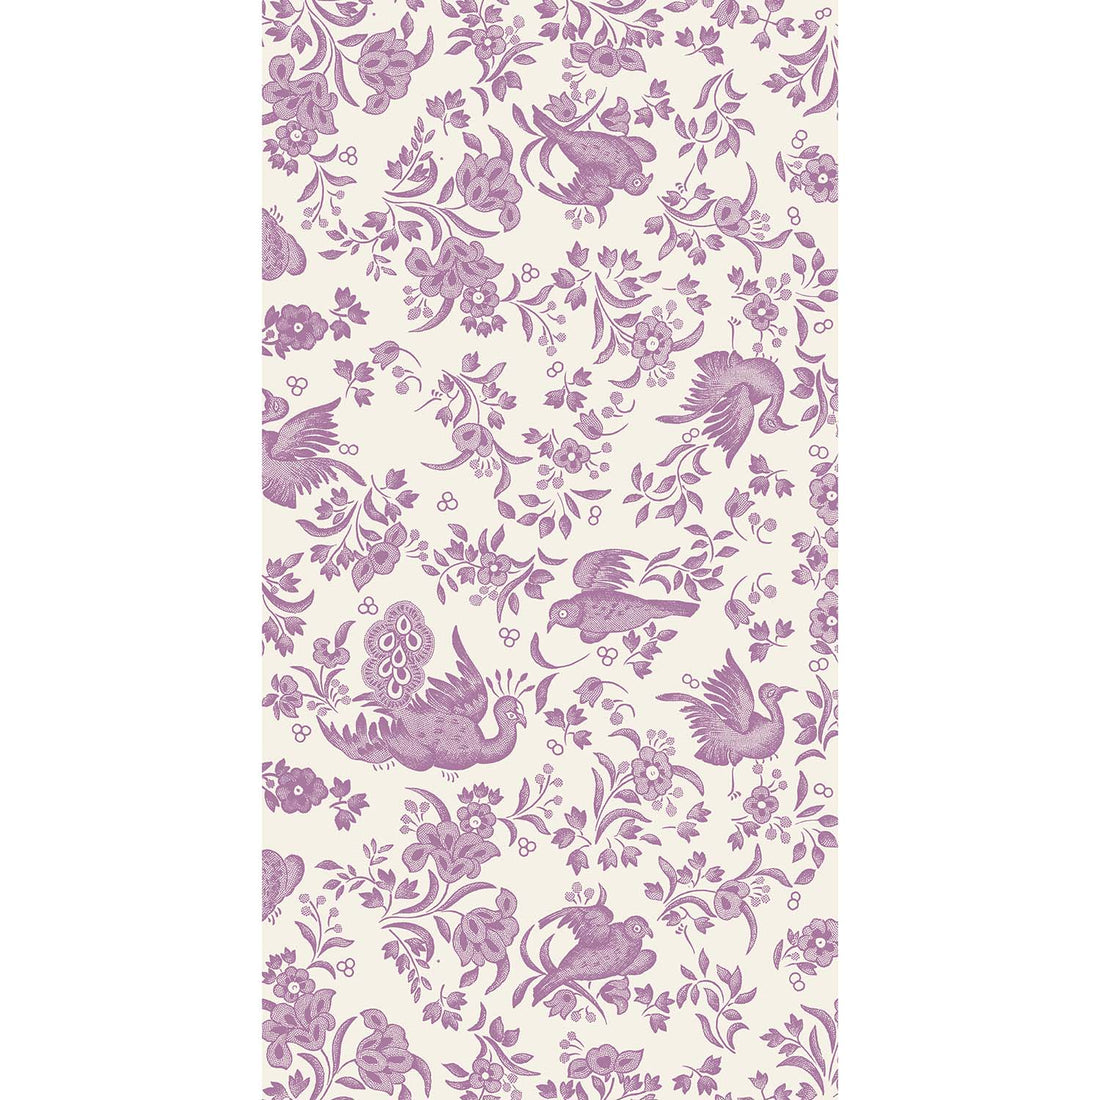 A rectangle guest napkin featuring a lilac purple bird and floral pattern on a white background, inspired by the ornamental bird pattern from Burleigh.